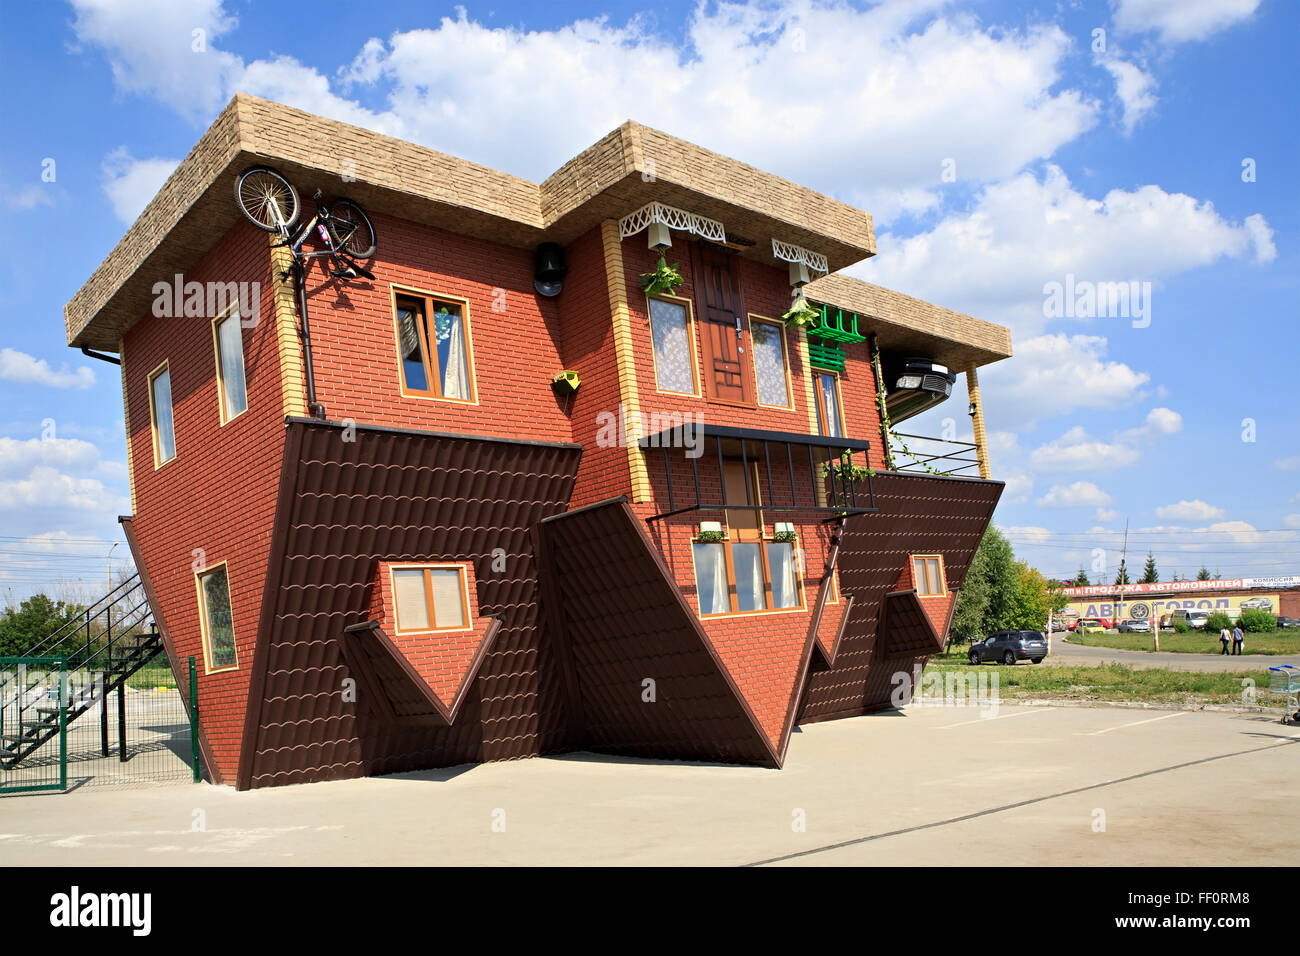 Attraction Upside down house. Stock Photo